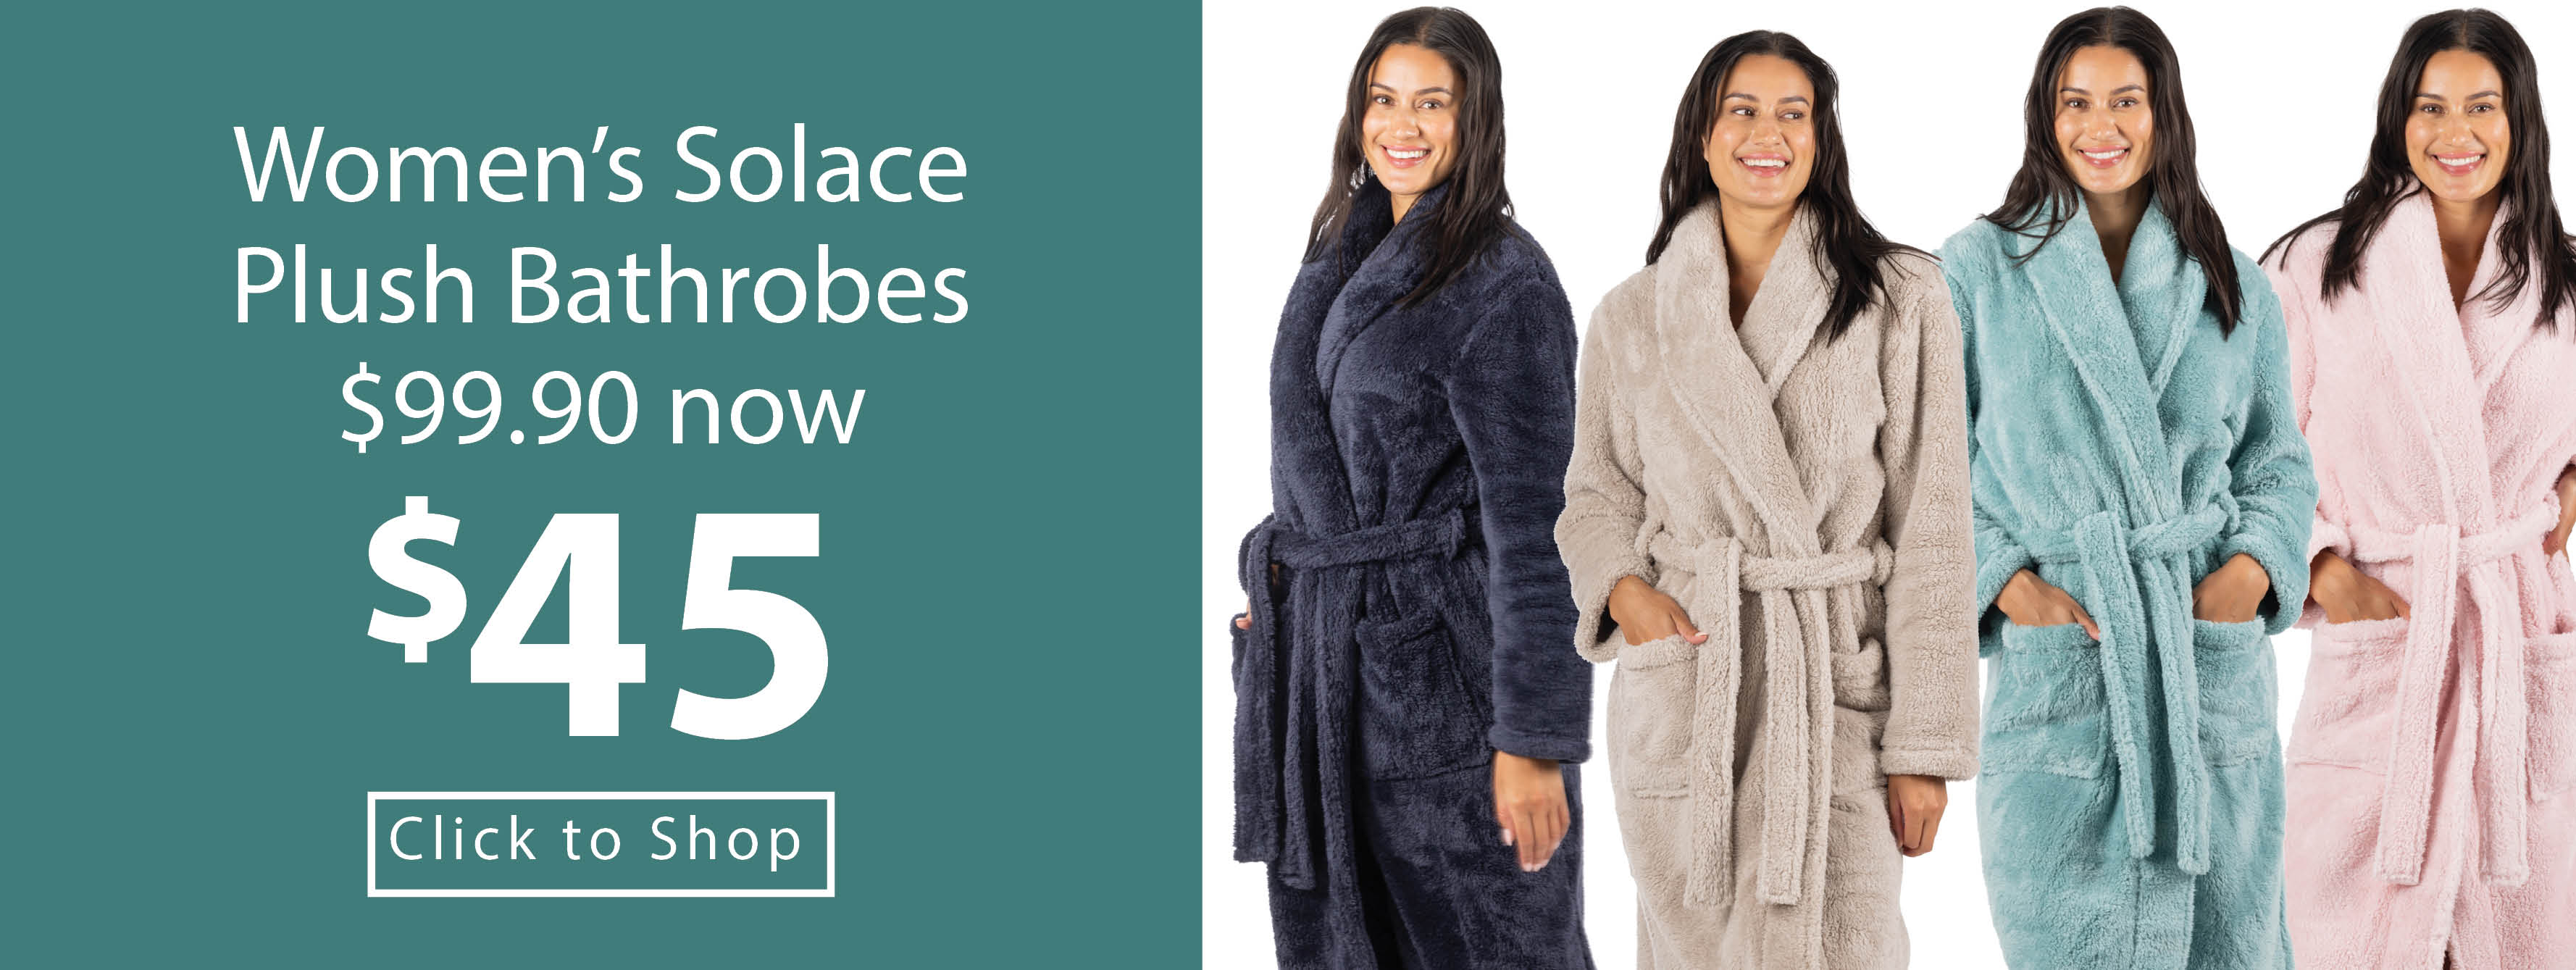 Solace plush robes $45